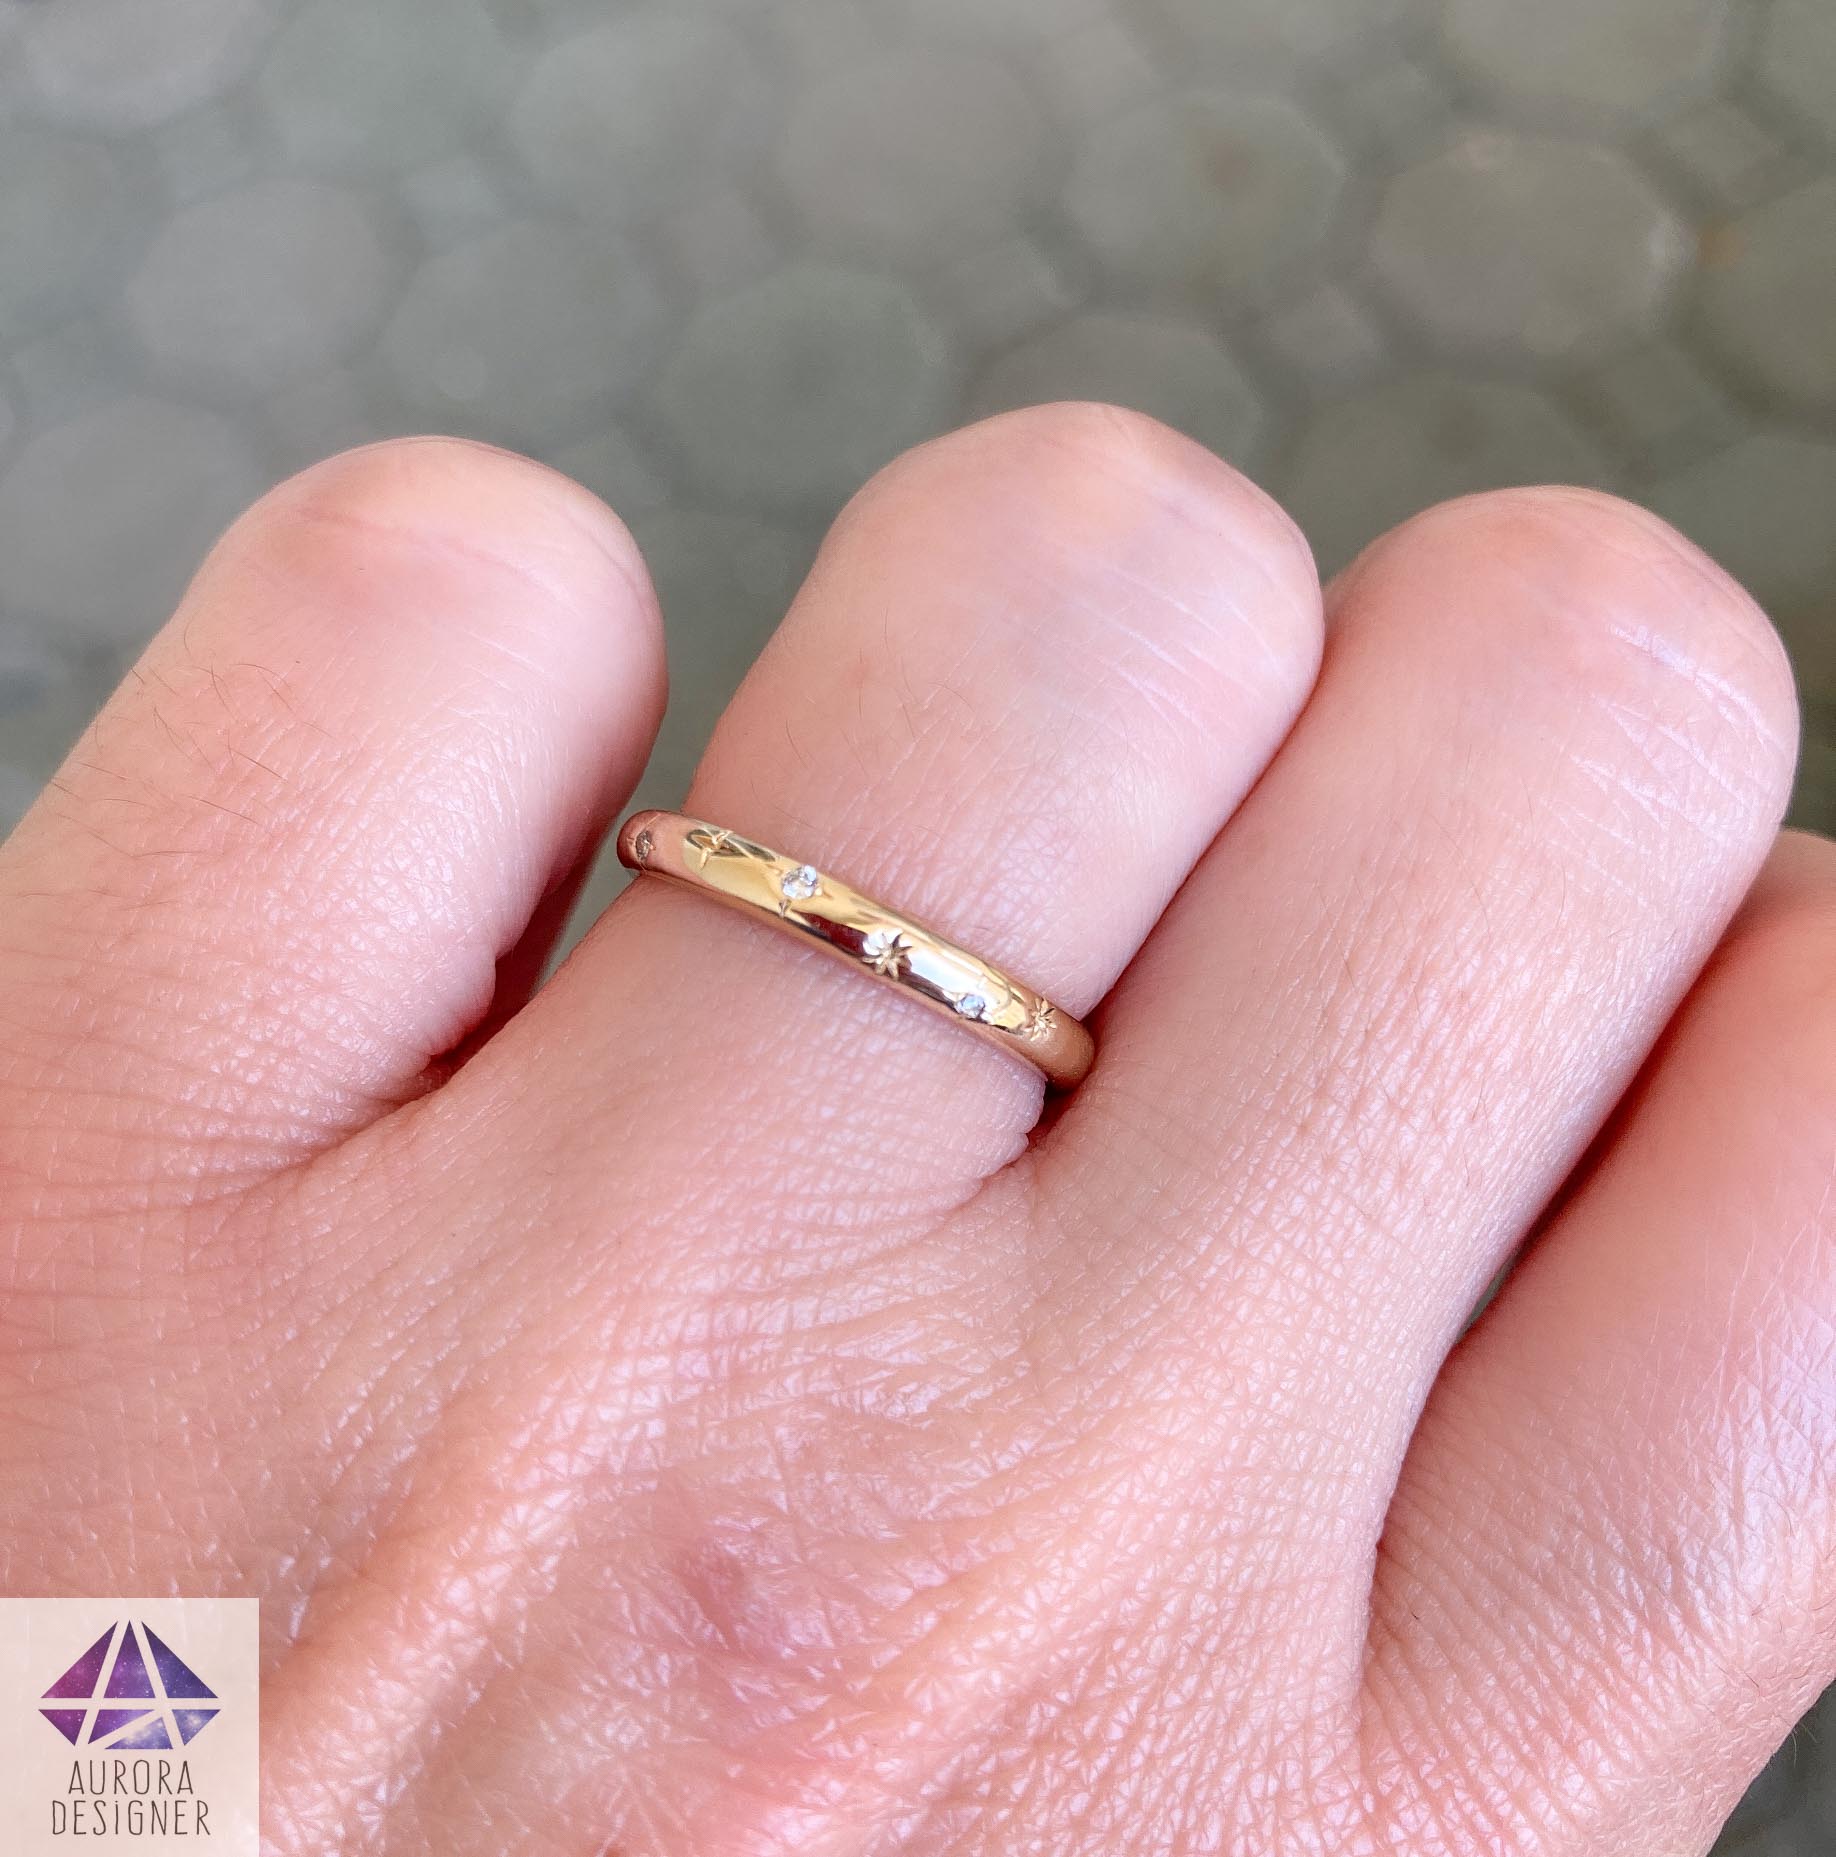 yellow gold engagement ring on finger